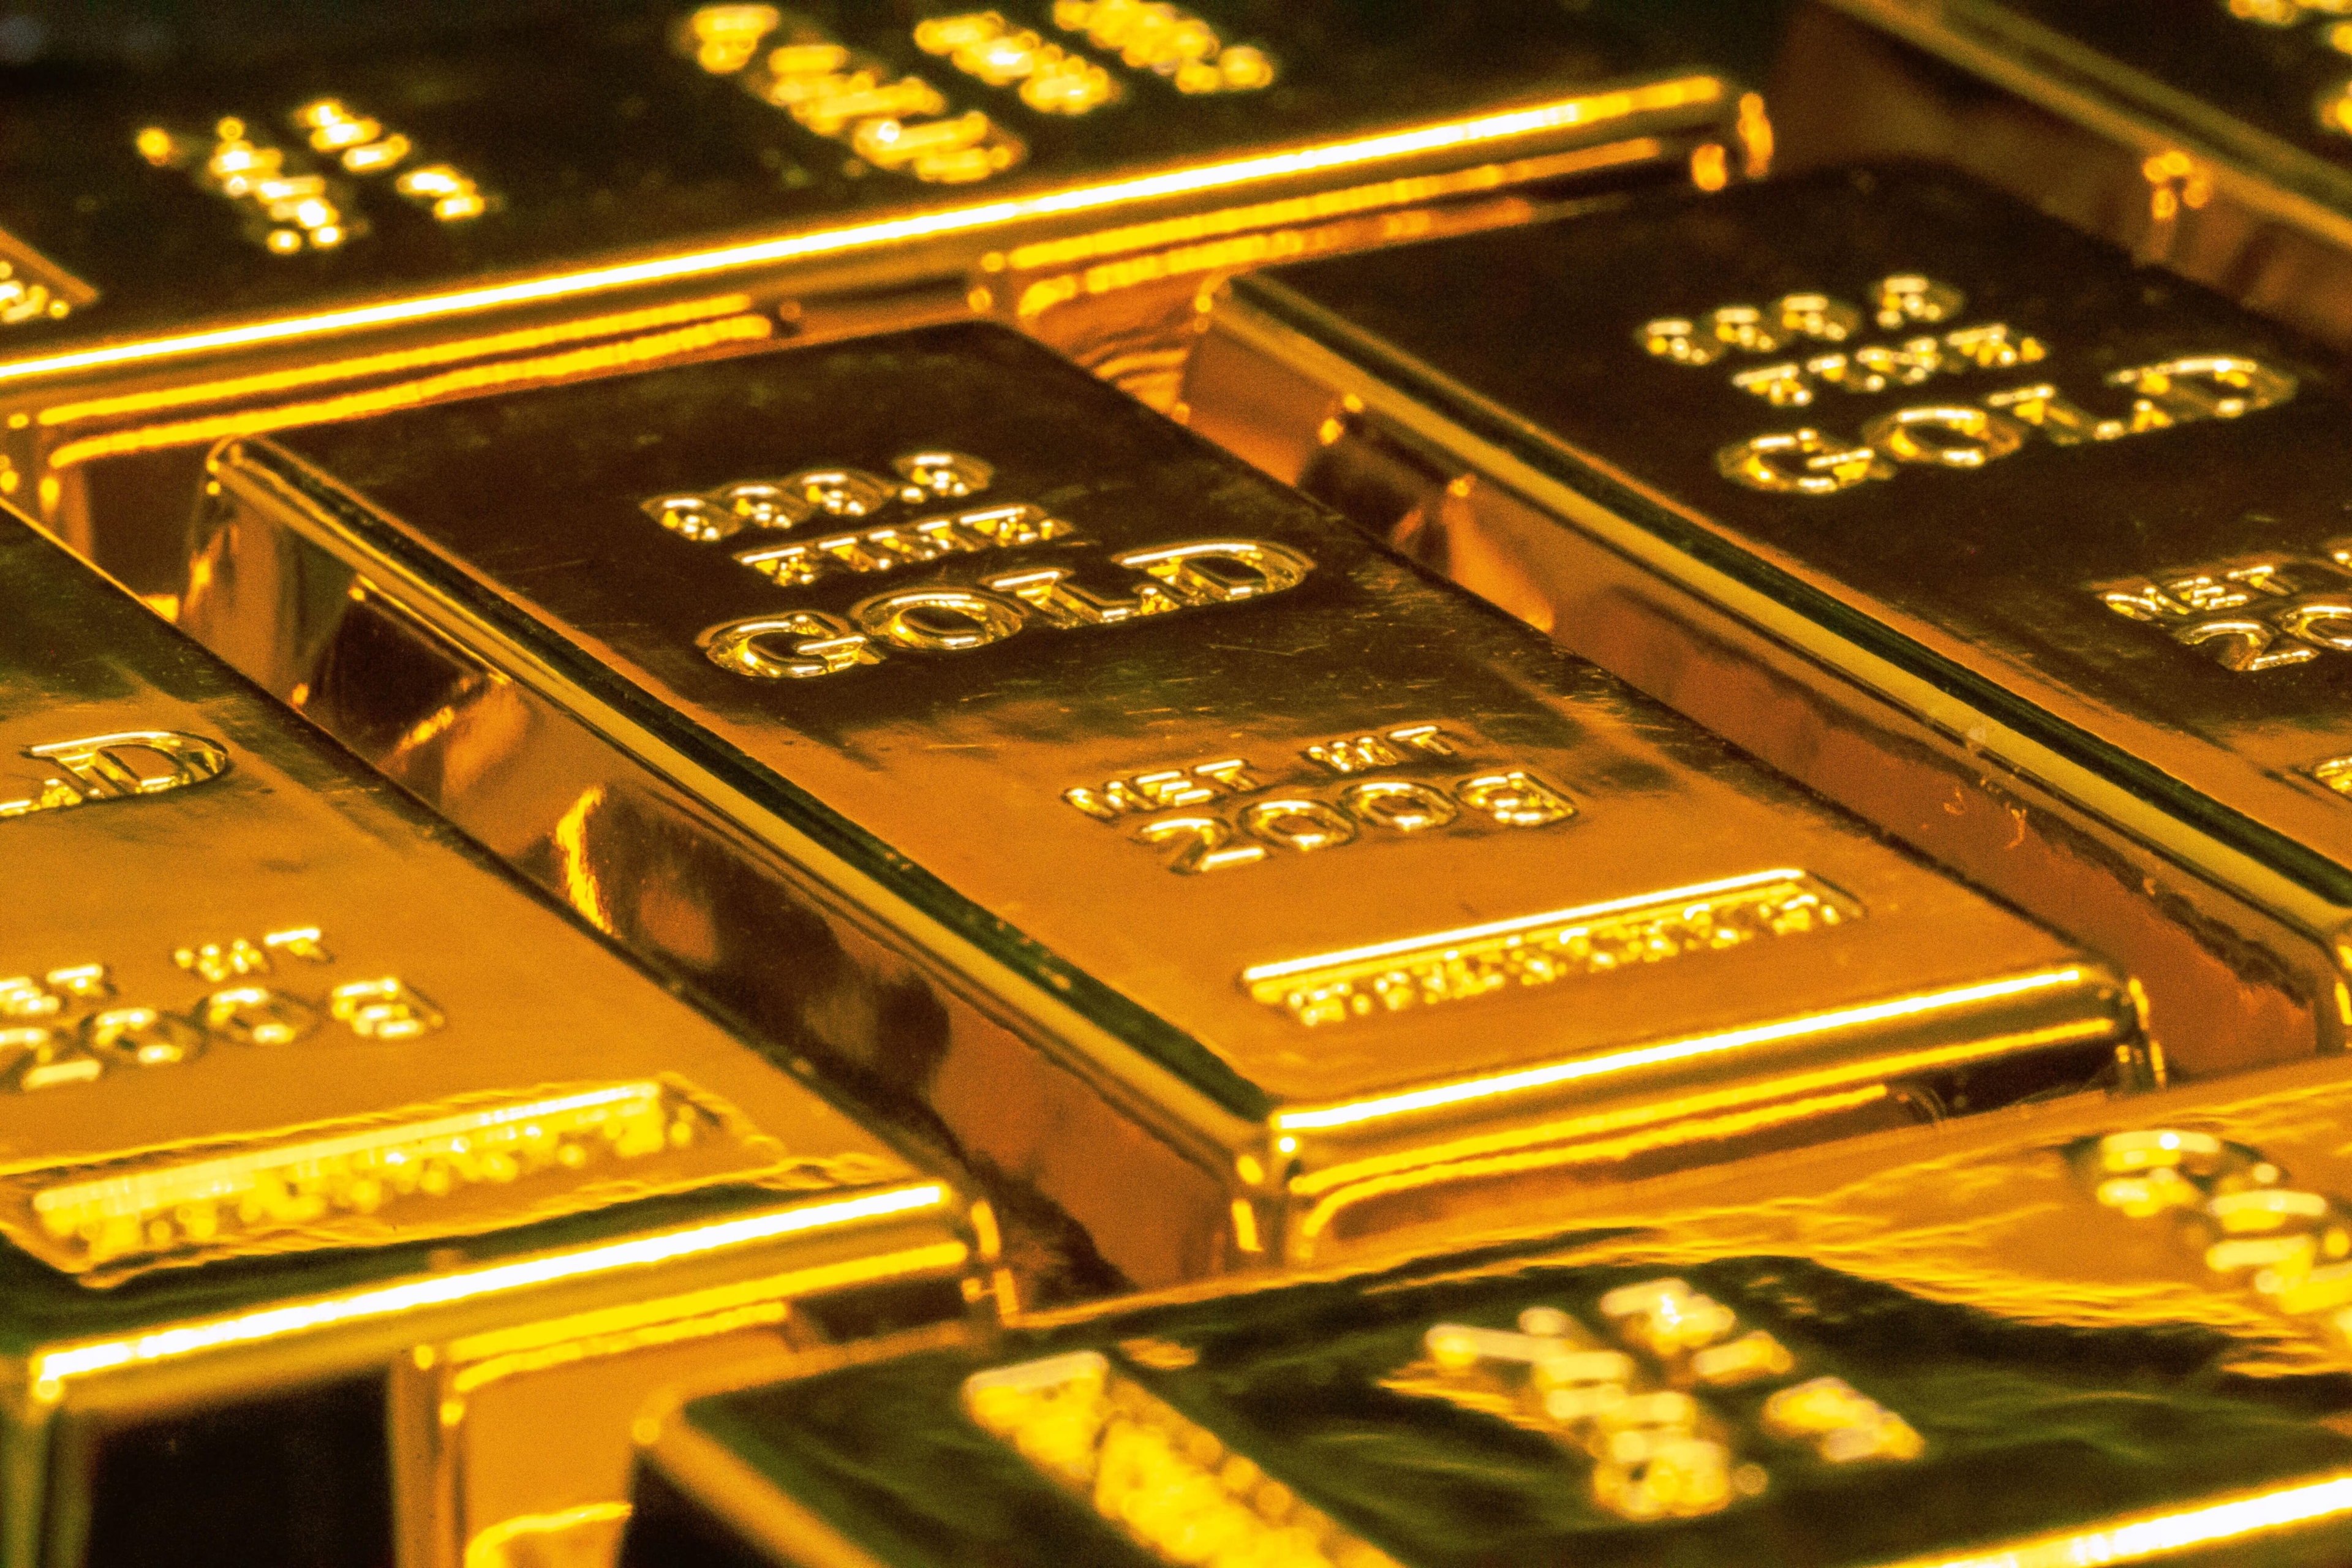 Gold traded choppy n April 6 as dollar gained and investors braced for rate hikes. Gold June futures contract settled at $1923.10 per troy ounce with a gain of 0.06 percent.